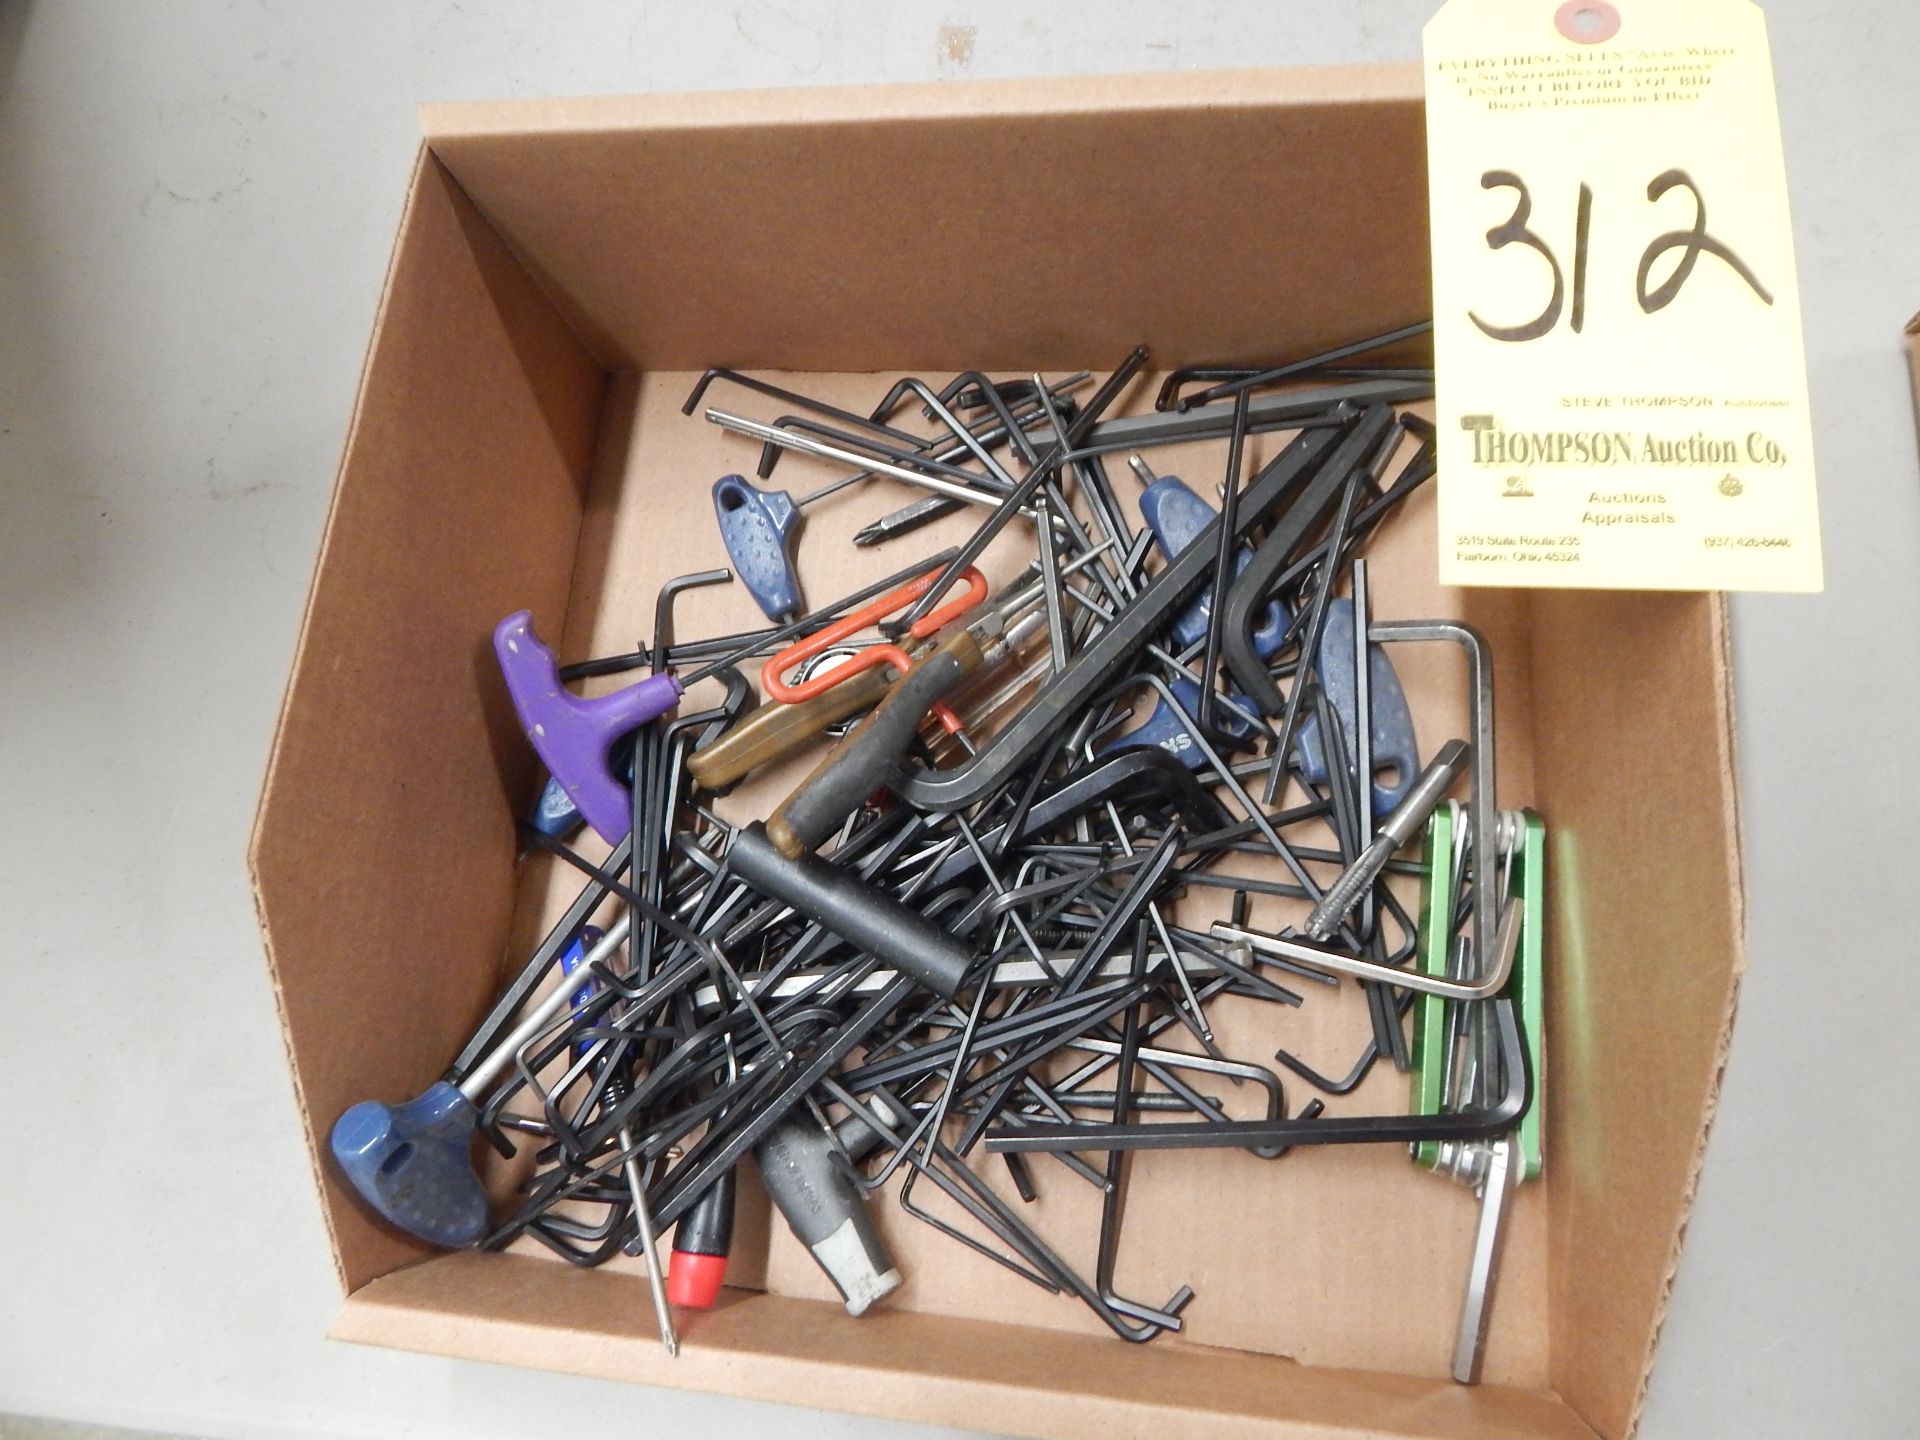 Lot, Allen Wrenches